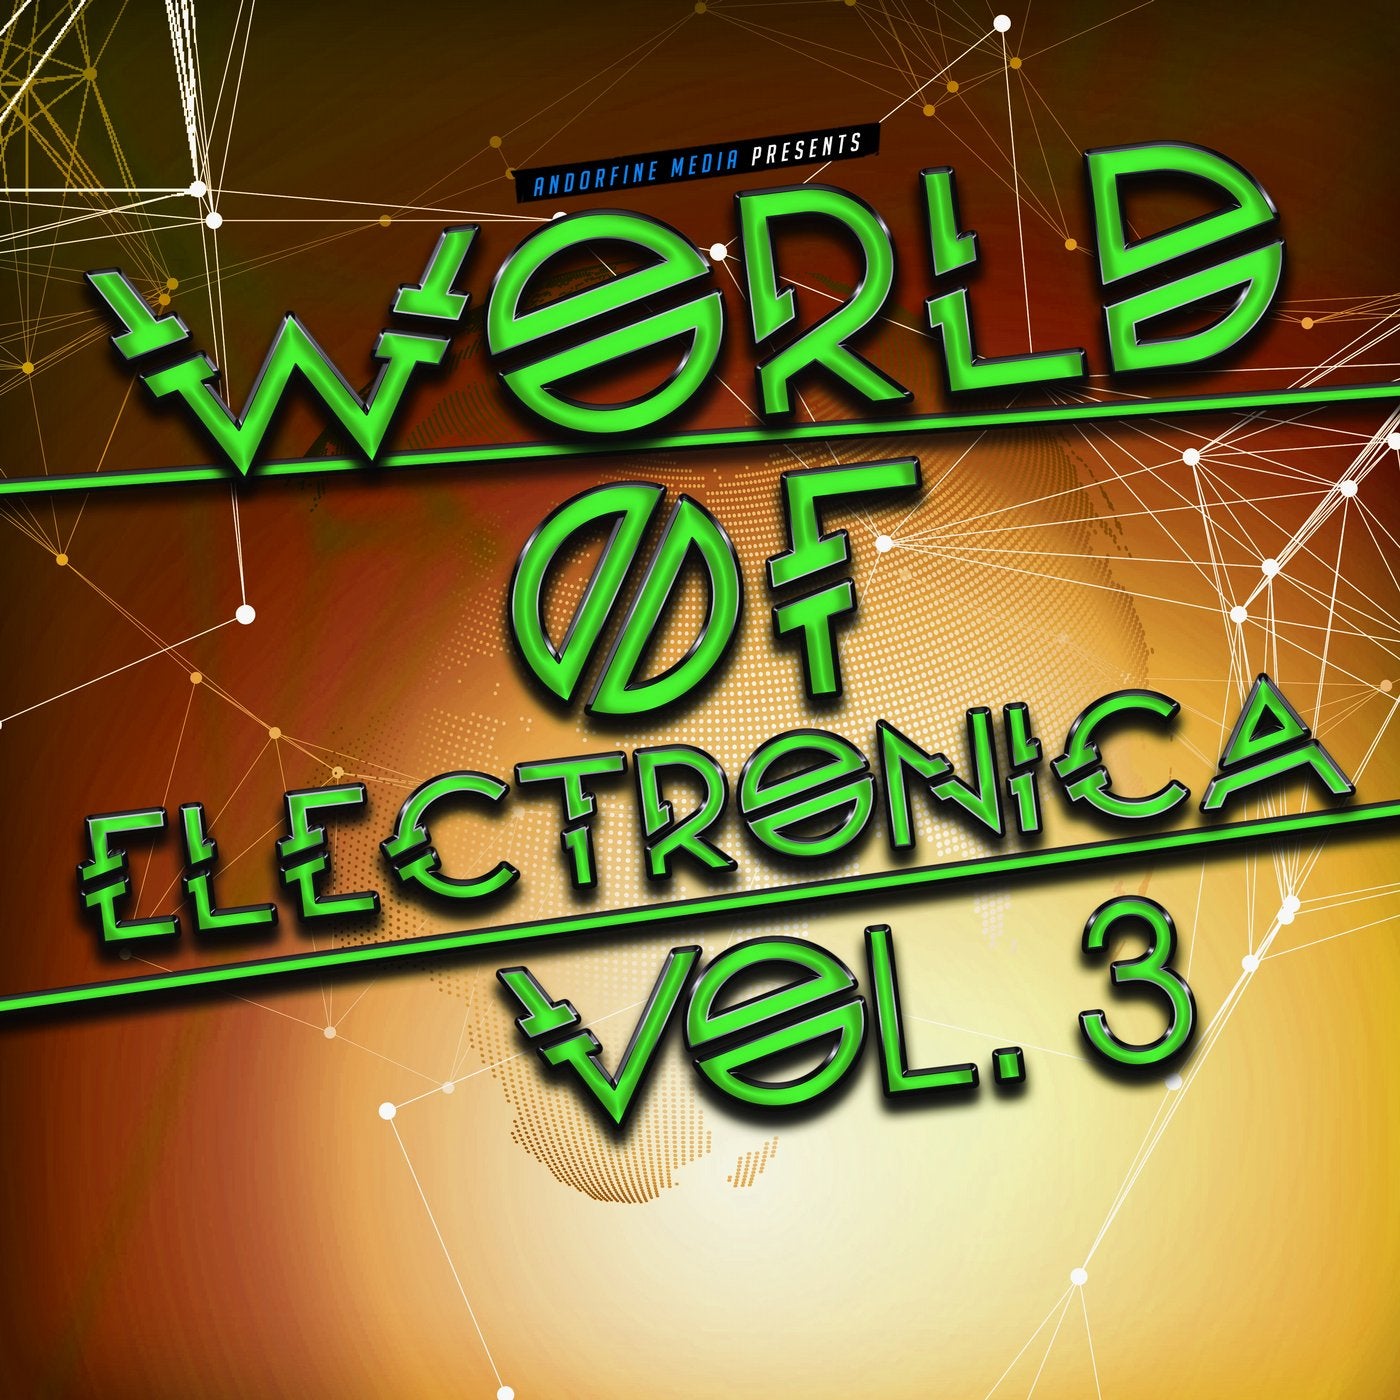 World of Electronica, Vol. 3